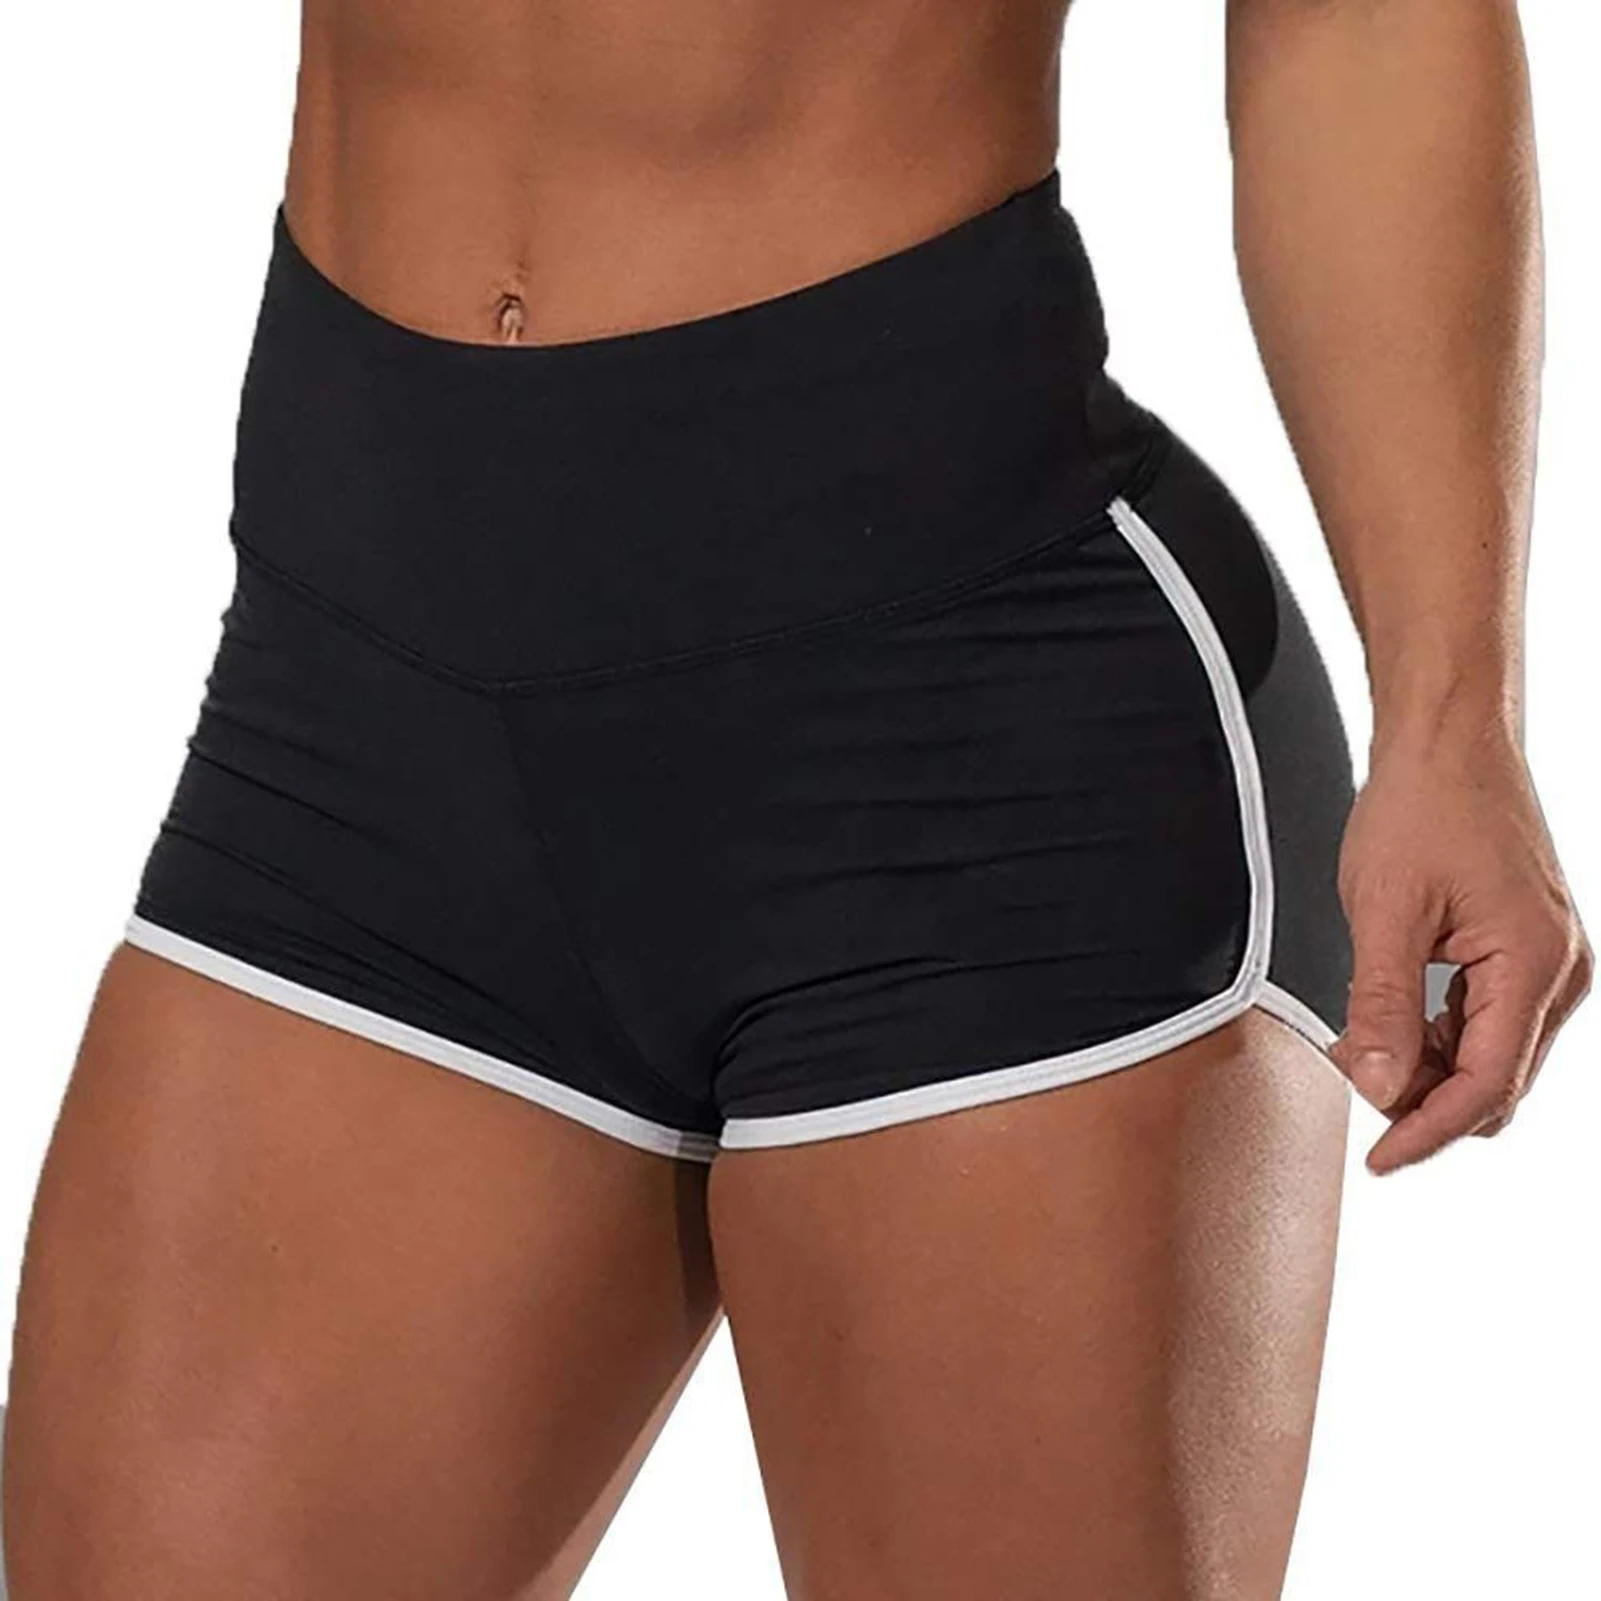 Women Sports Athletic Shorts Soft & Breathable Athletic Pants for Outdoor Excising Gym Fitness